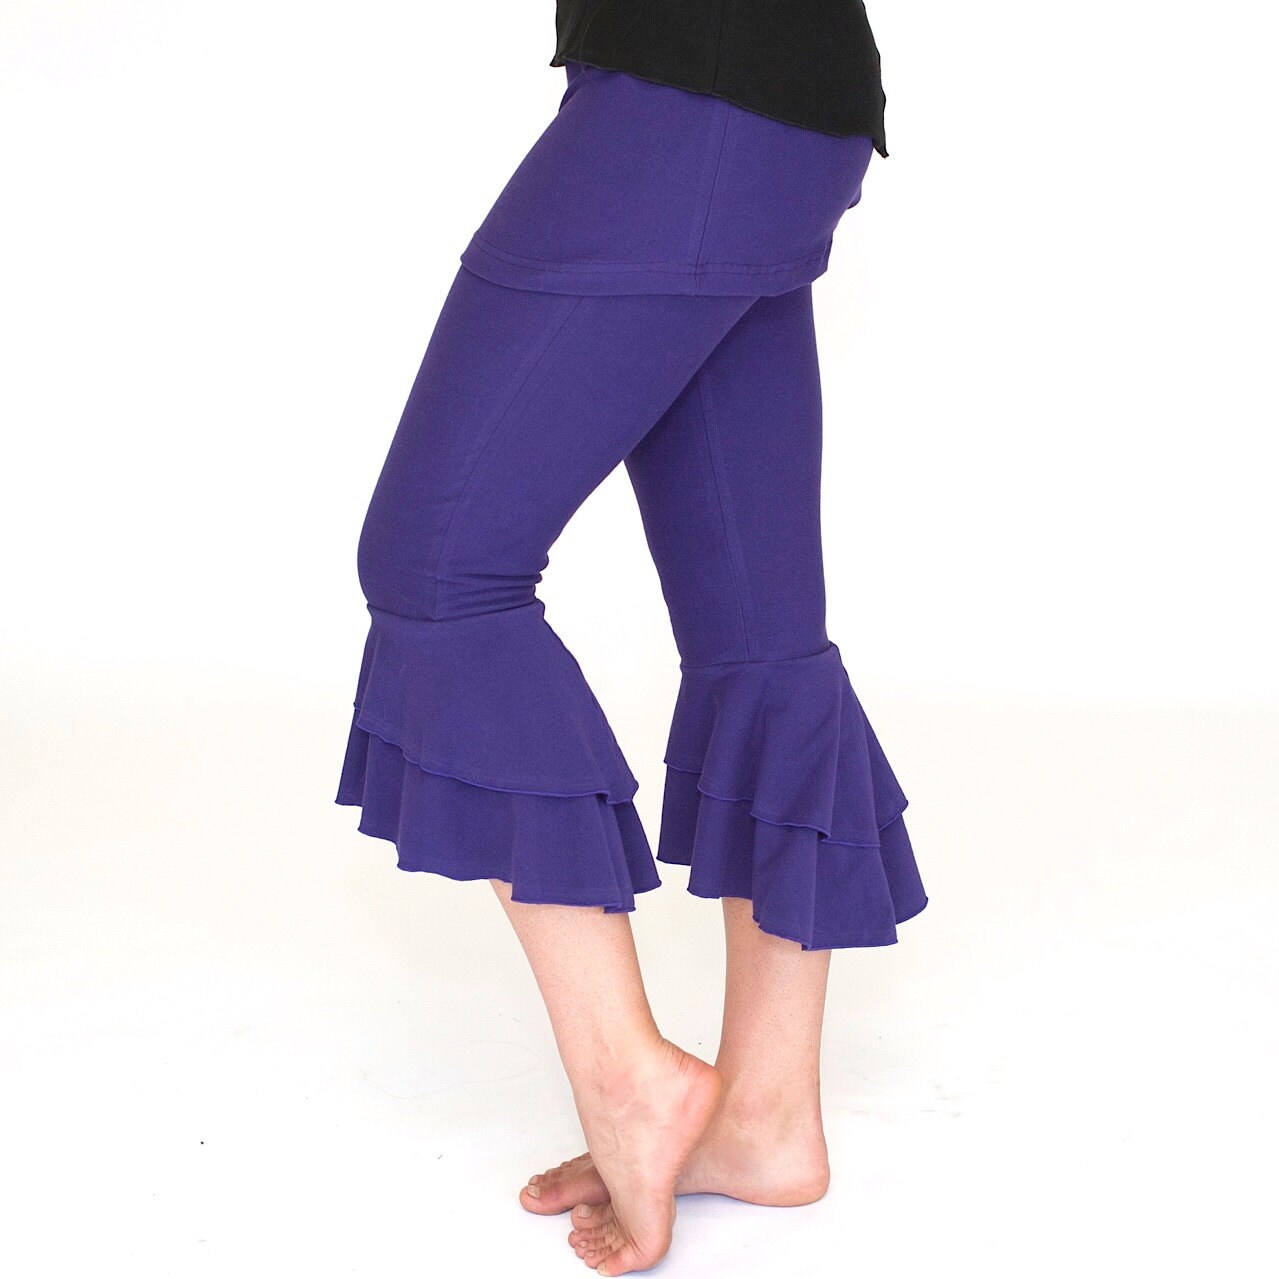 Ruffle bottom Capri Pants / bloomers with attached skirt SASSY